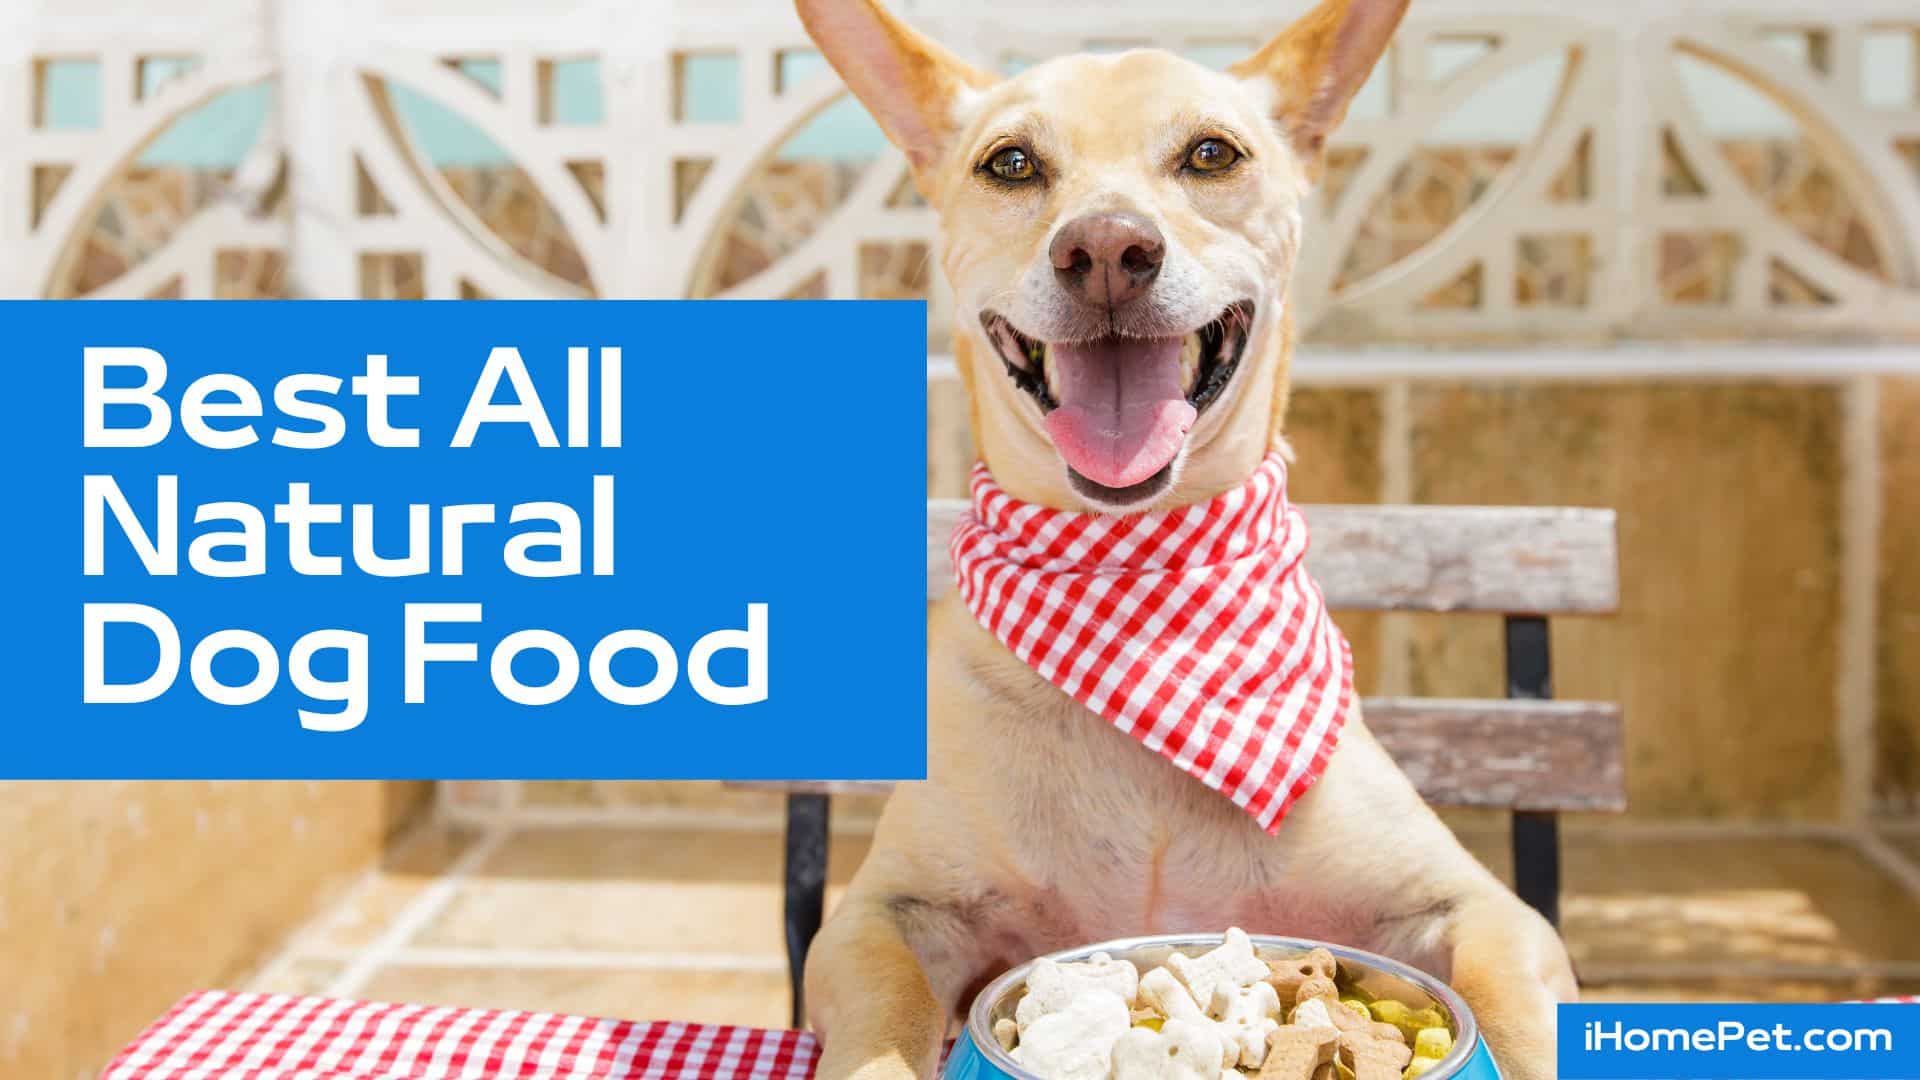 Natural dog foods for weight management